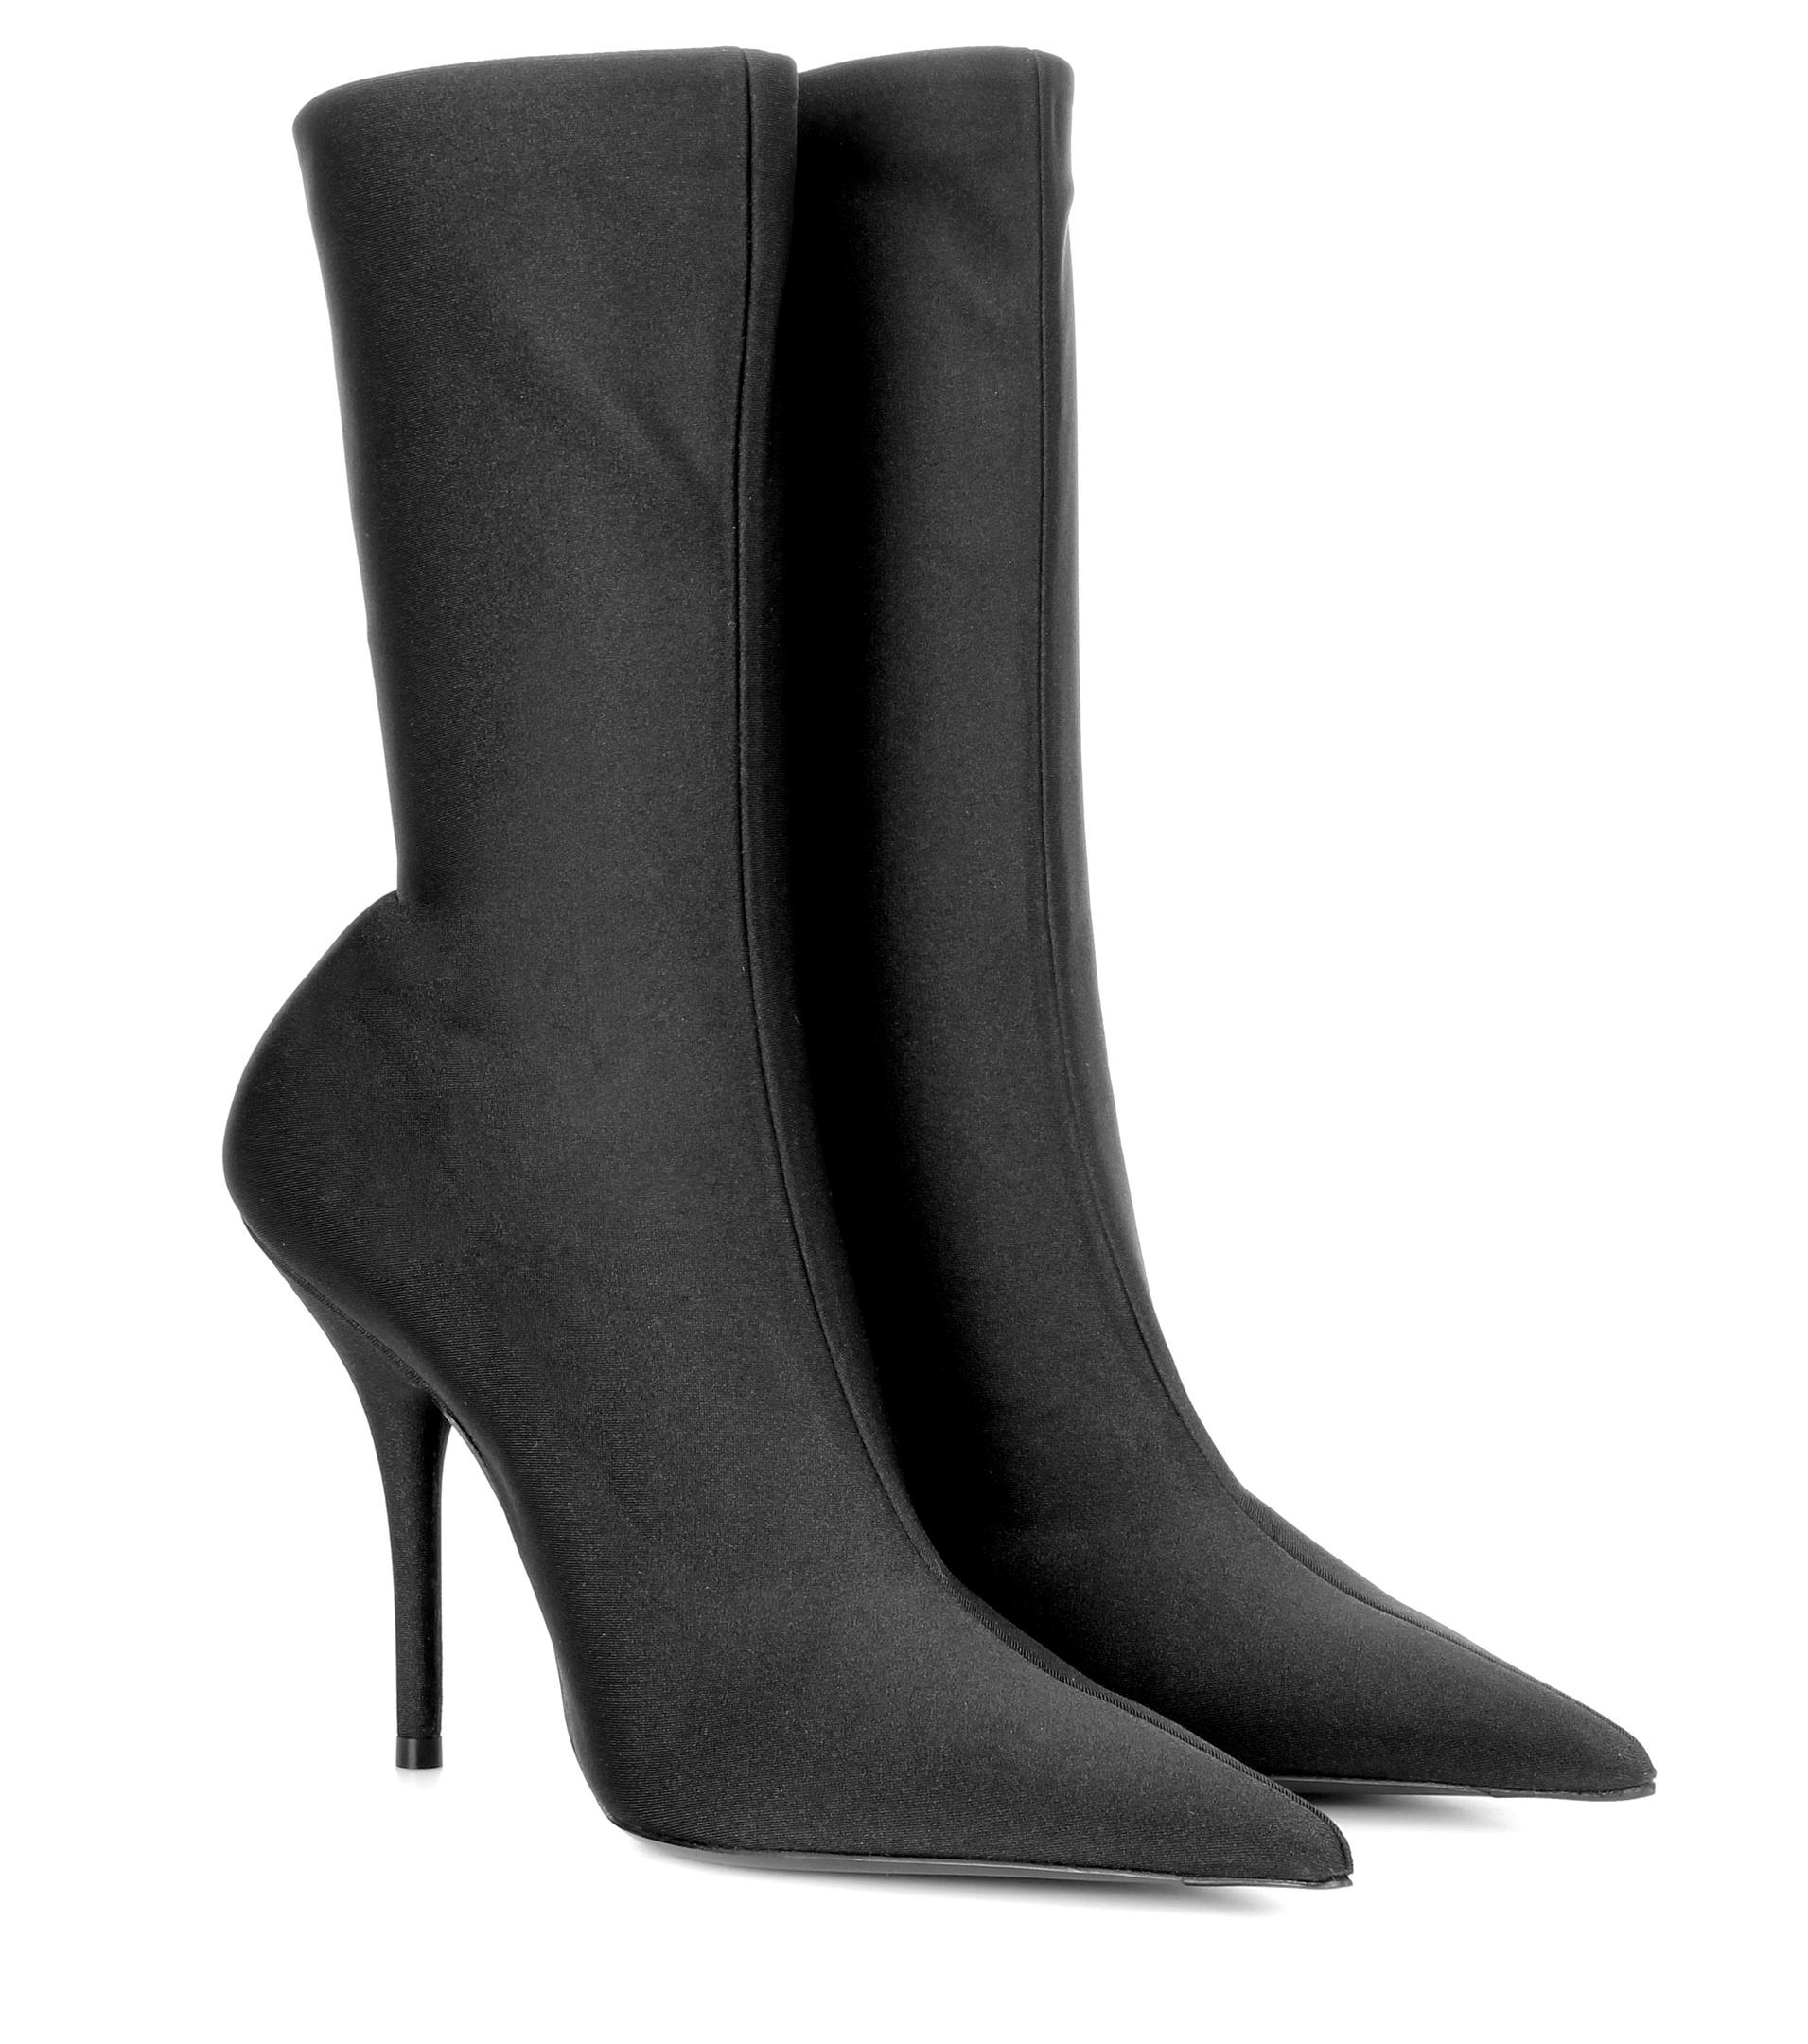 Balenciaga Knife Ankle Boots in Black - Lyst